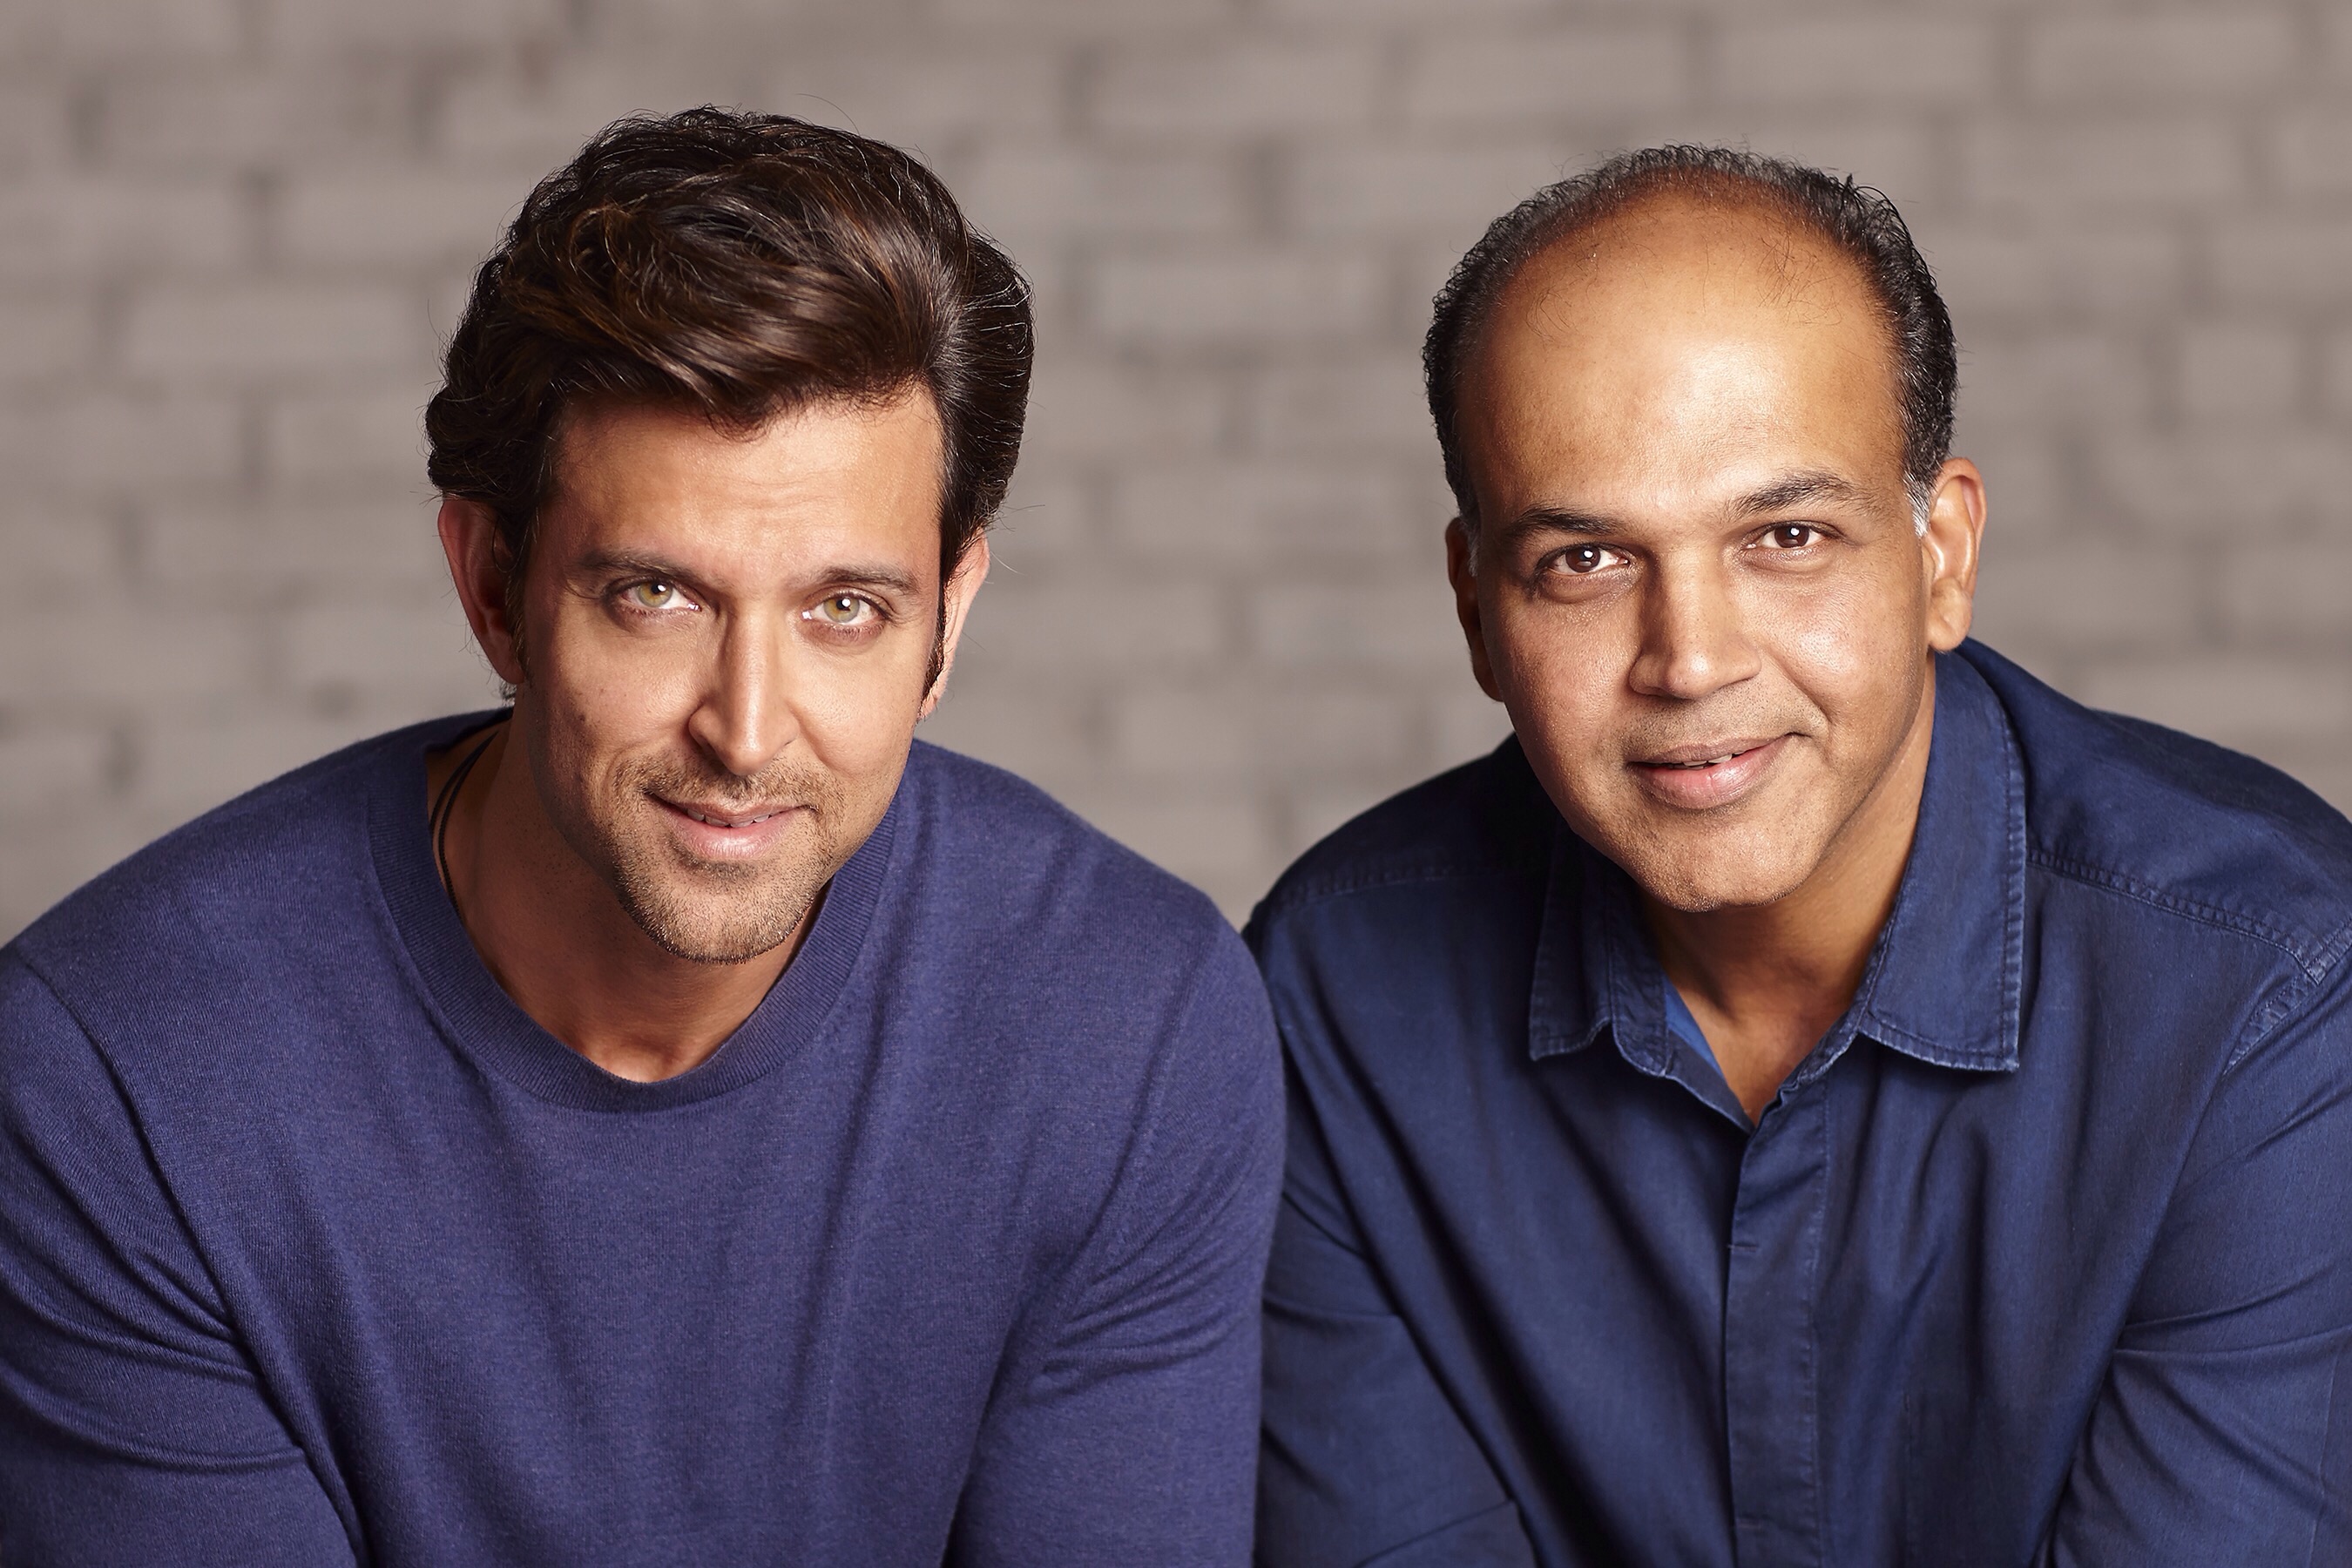 Hrithik Roshan's 'Mohenjo Daro' will see no change in release date